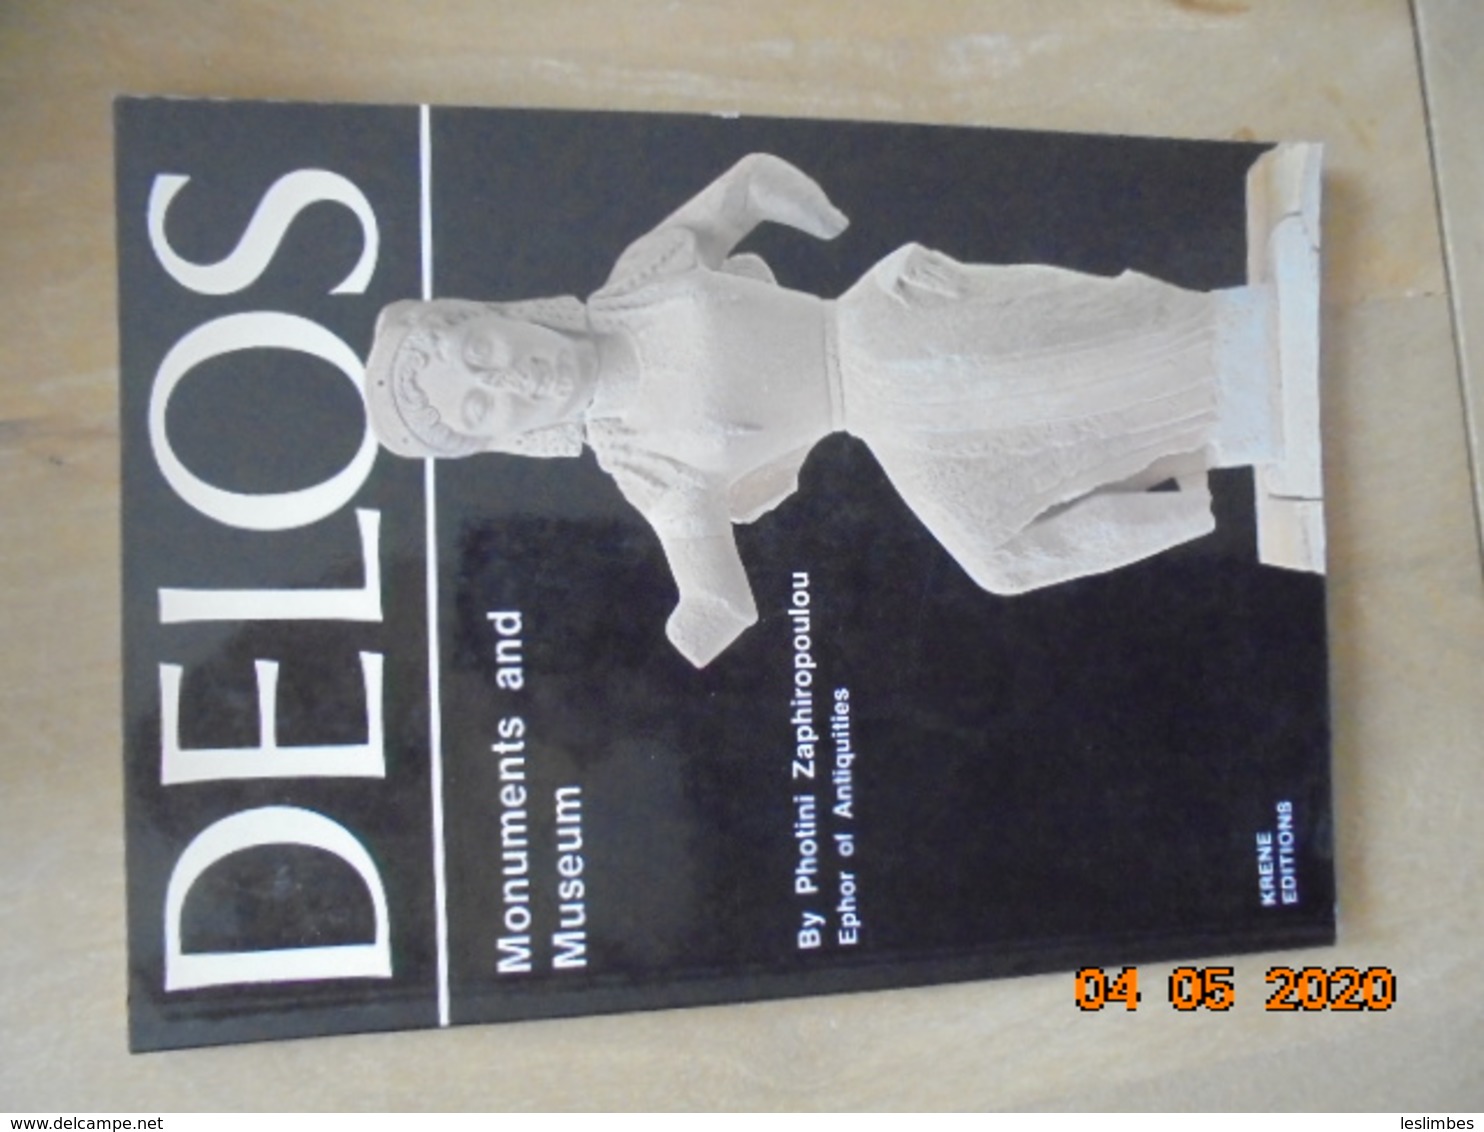 Delos: Monuments And Museum By Photini Zaphiropoulou. Krene Editions, 1983. Greece - Viajes/Exploración